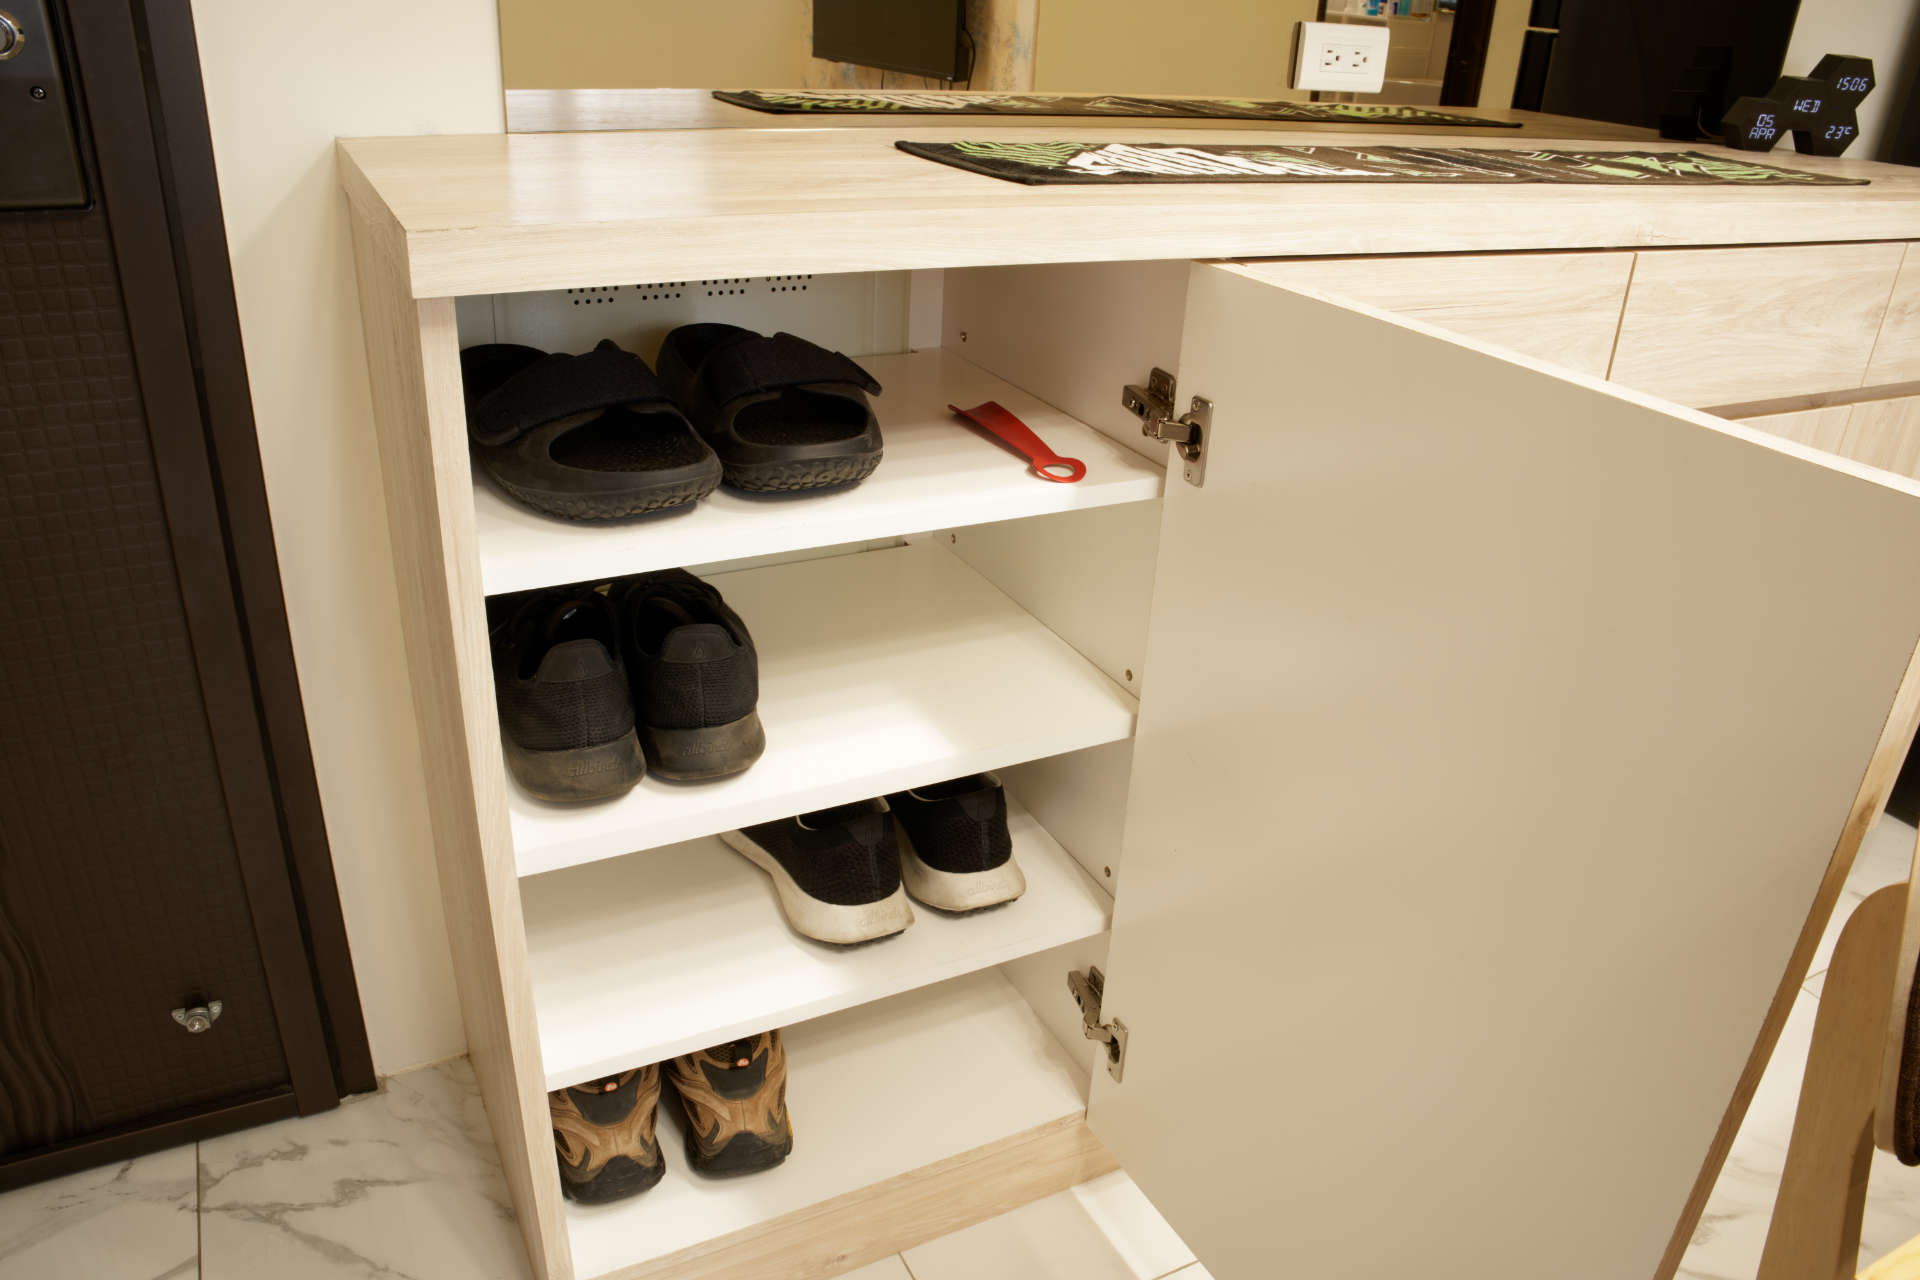 An open shoe cupboard, with shoes on four shelves. A metal grate can be seen on the back wall of the cupboard.